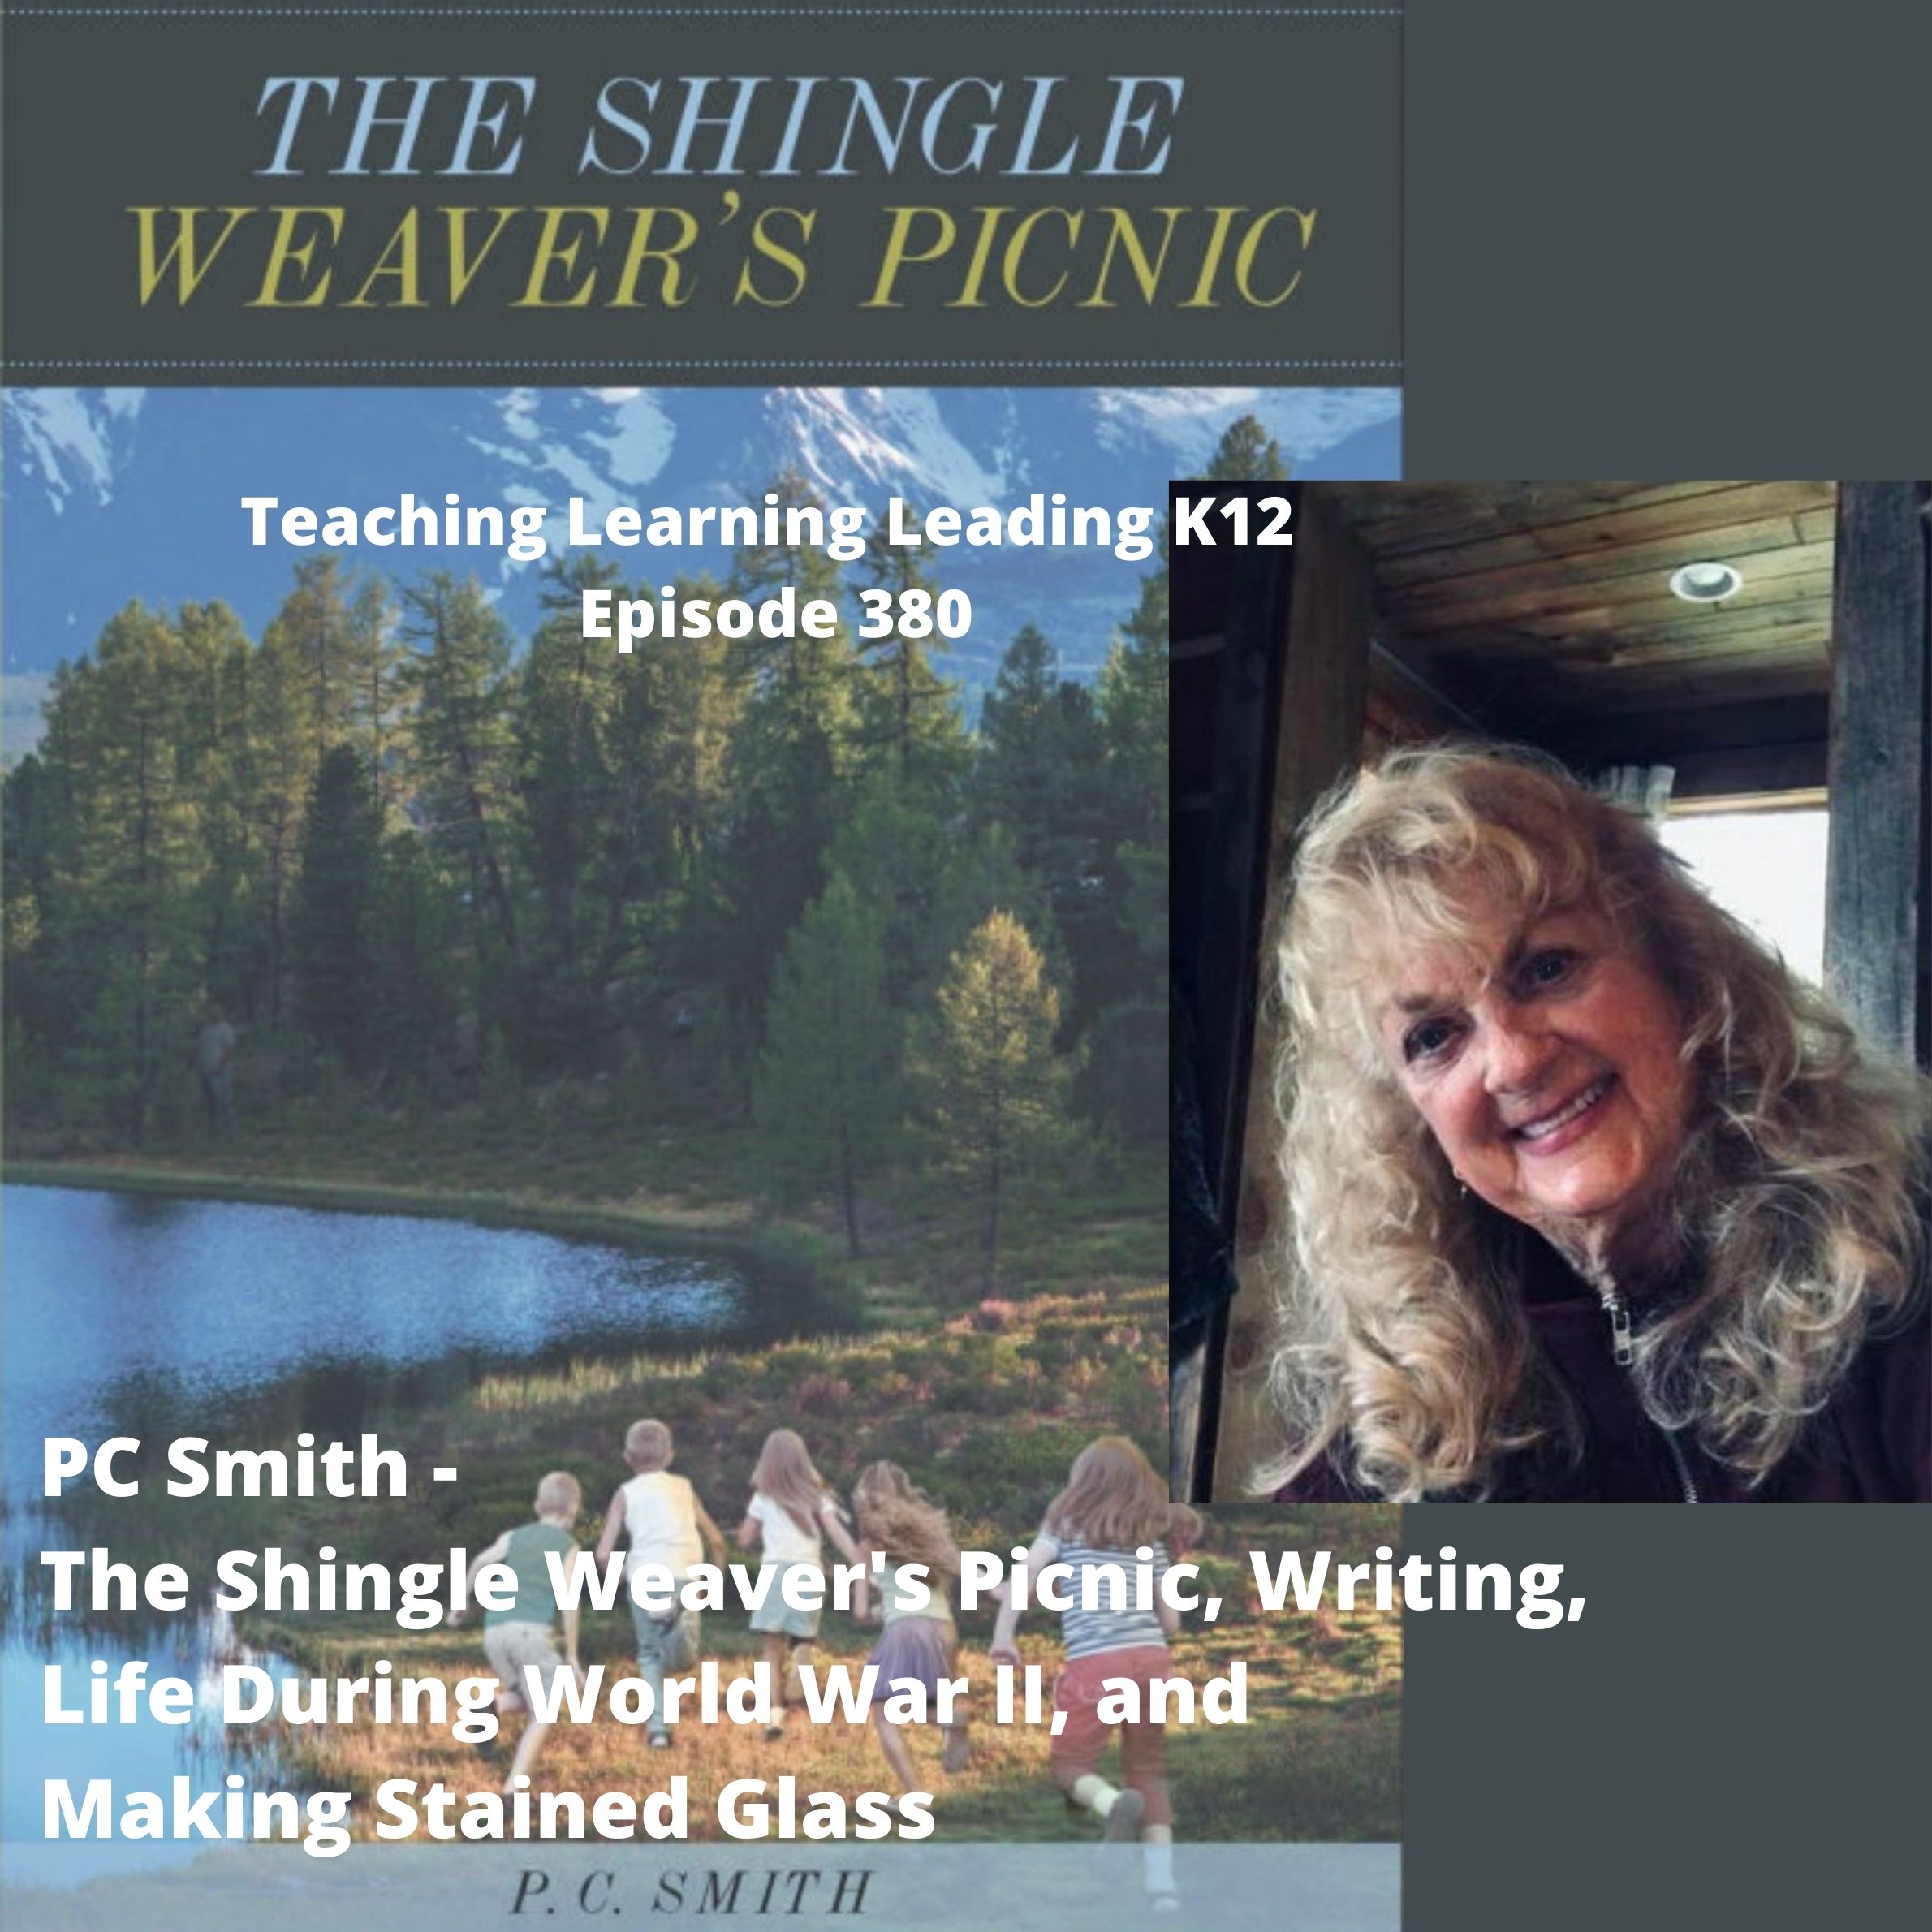 PC Smith - The Shingle Weaver's Picnic, Life During World War II, and Making Stained Glass - 380 Image